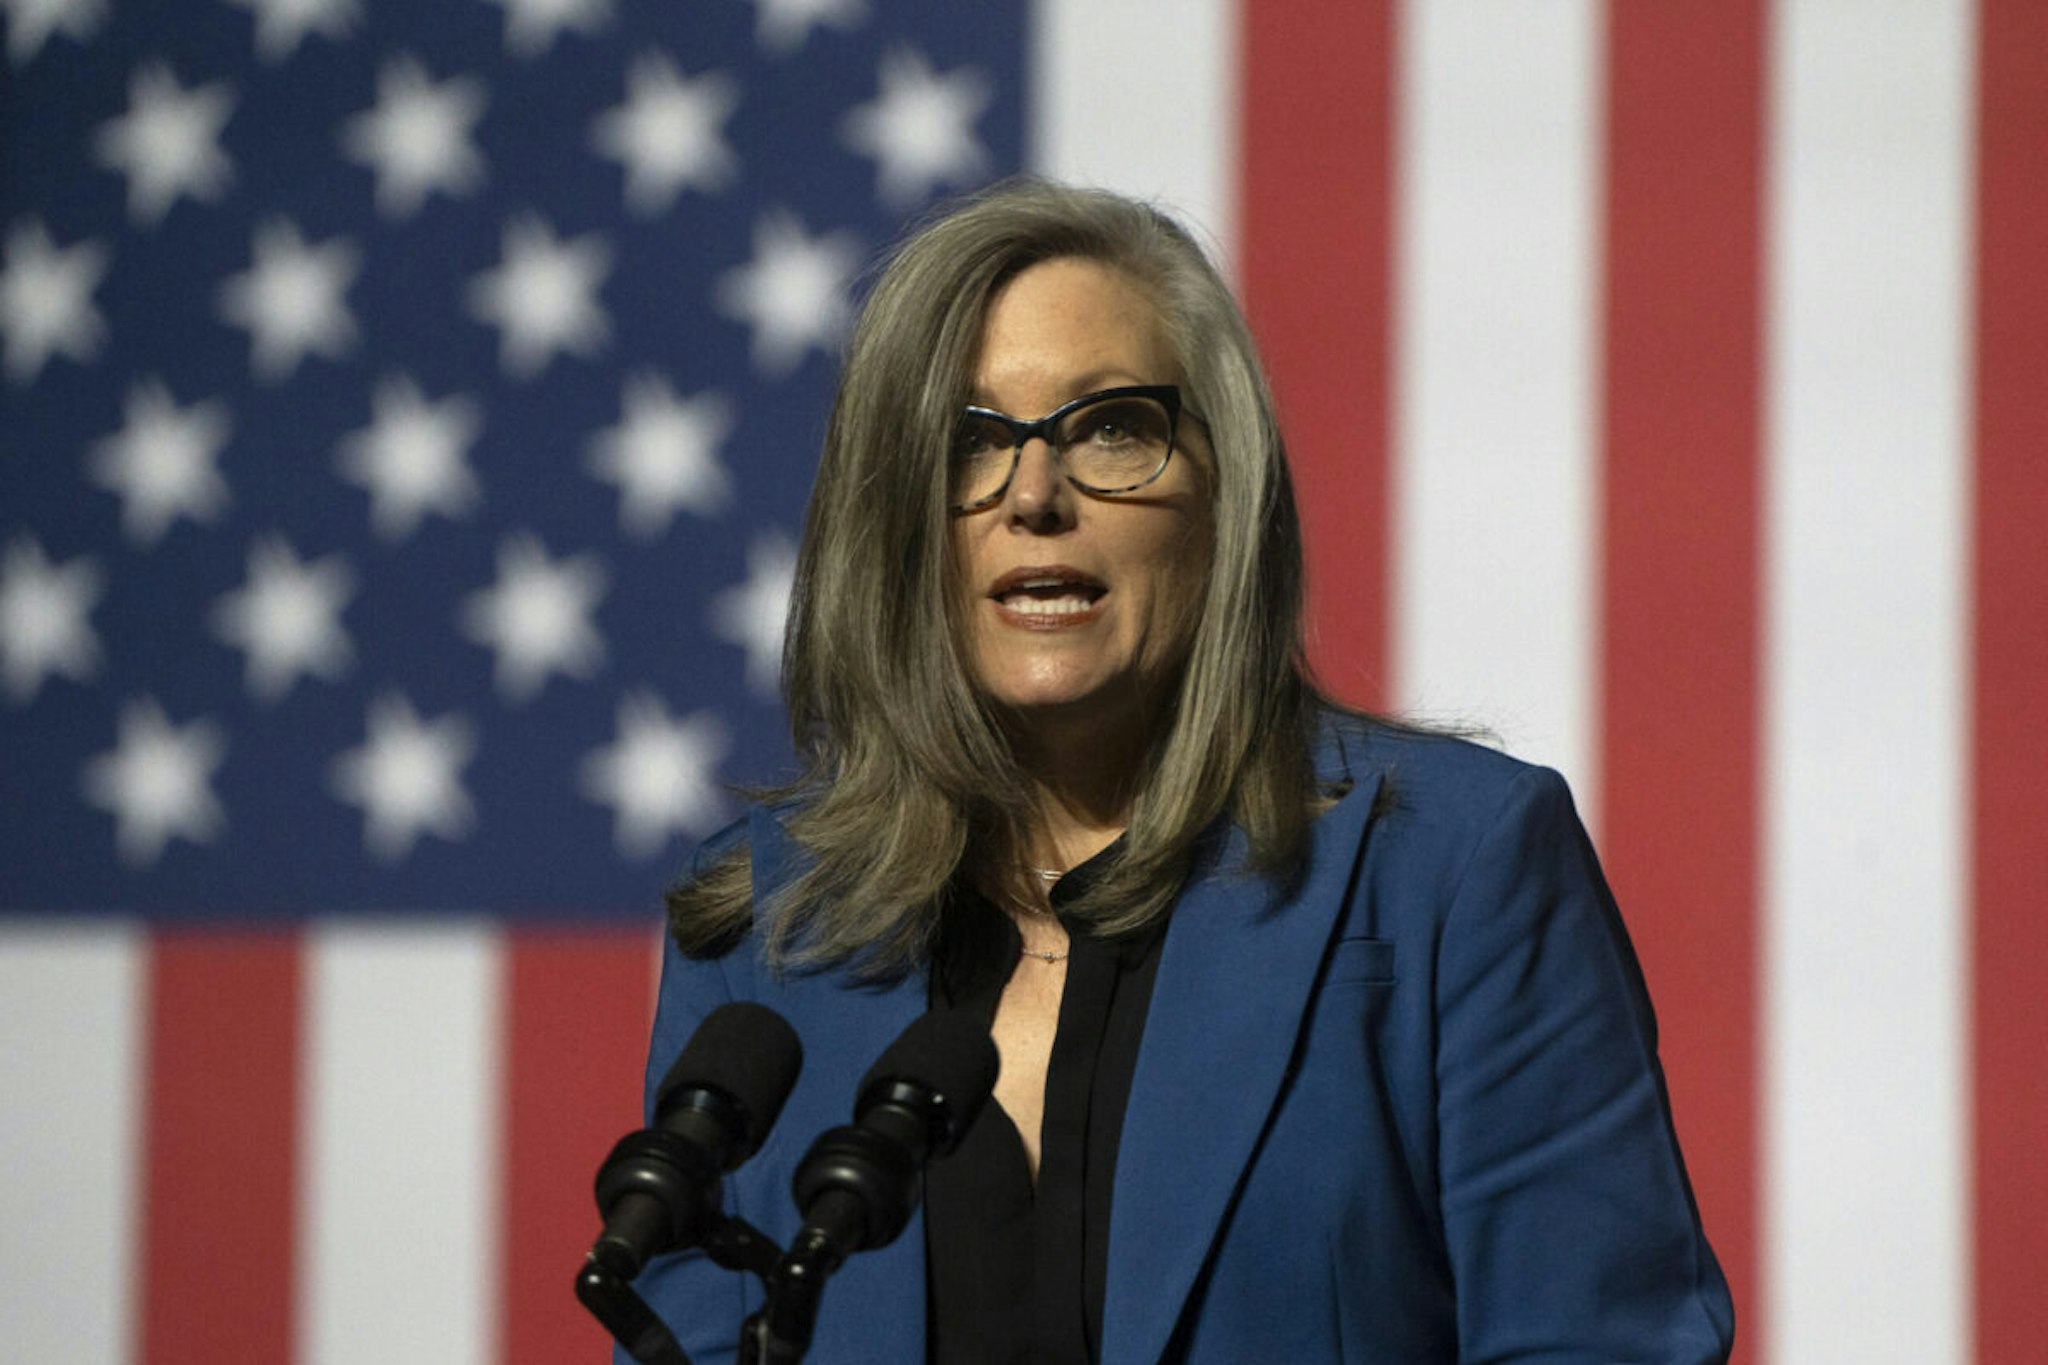 TEMPE, ARIZONA - SEPTEMBER 28: Arizona Gov. Katie Hobbs gives a brief speech prior to President Joe Biden's remarks at the Tempe Center for the Arts on September 28, 2023 in Tempe, Arizona. Biden delivered remarks on protecting democracy, honoring the legacy of the late Sen. John McCain (R-AZ), and revealed funding for the McCain Library.